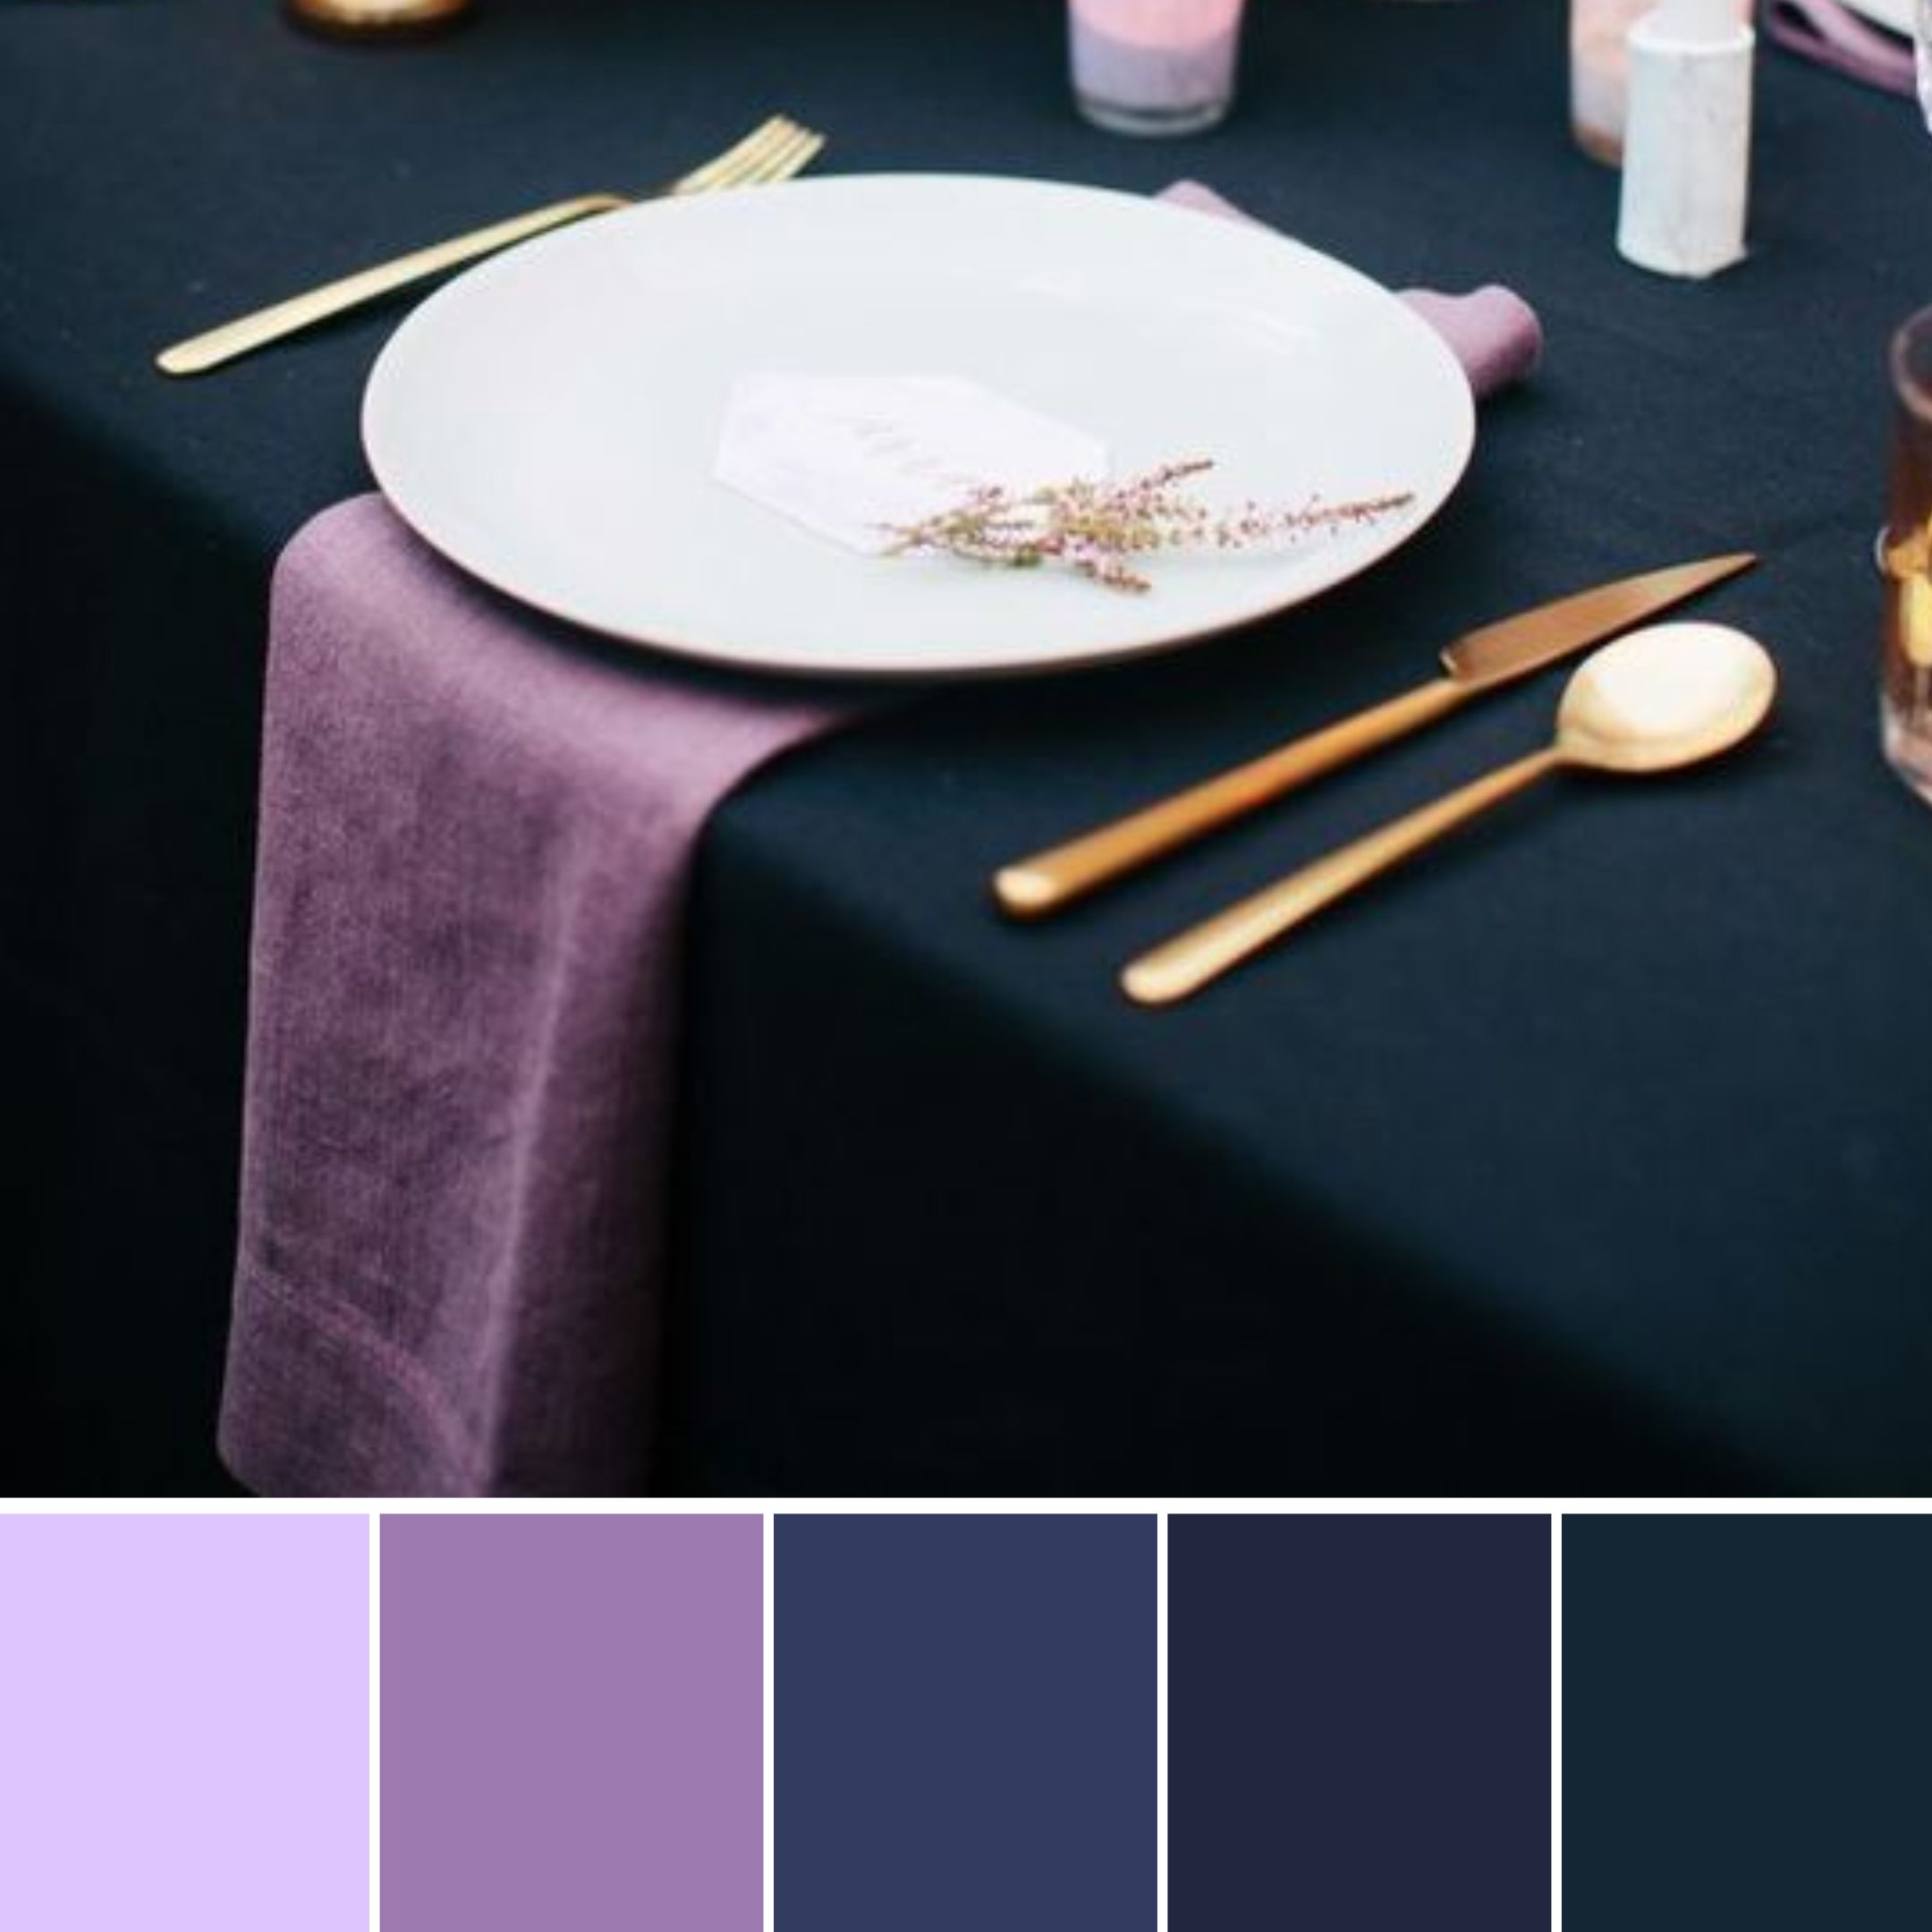 navy and lavender table set up